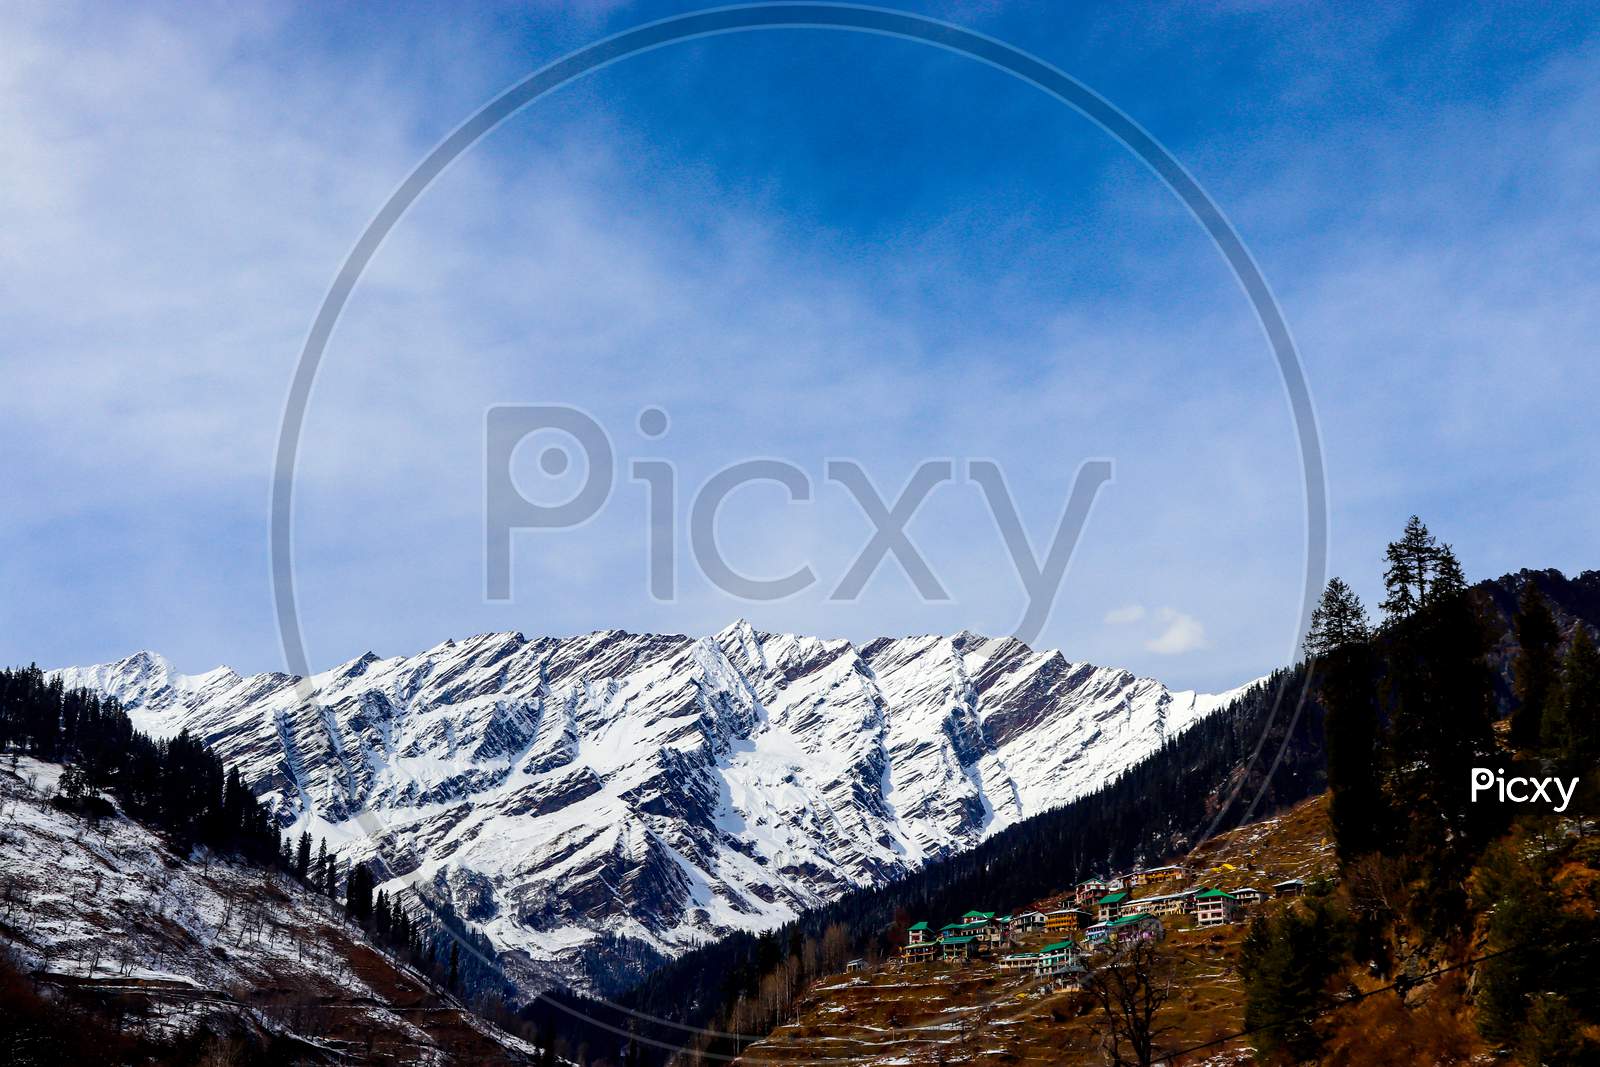 Snow-Covered Mountain In The Background With Mountain Covered With Pine Trees In The Front.